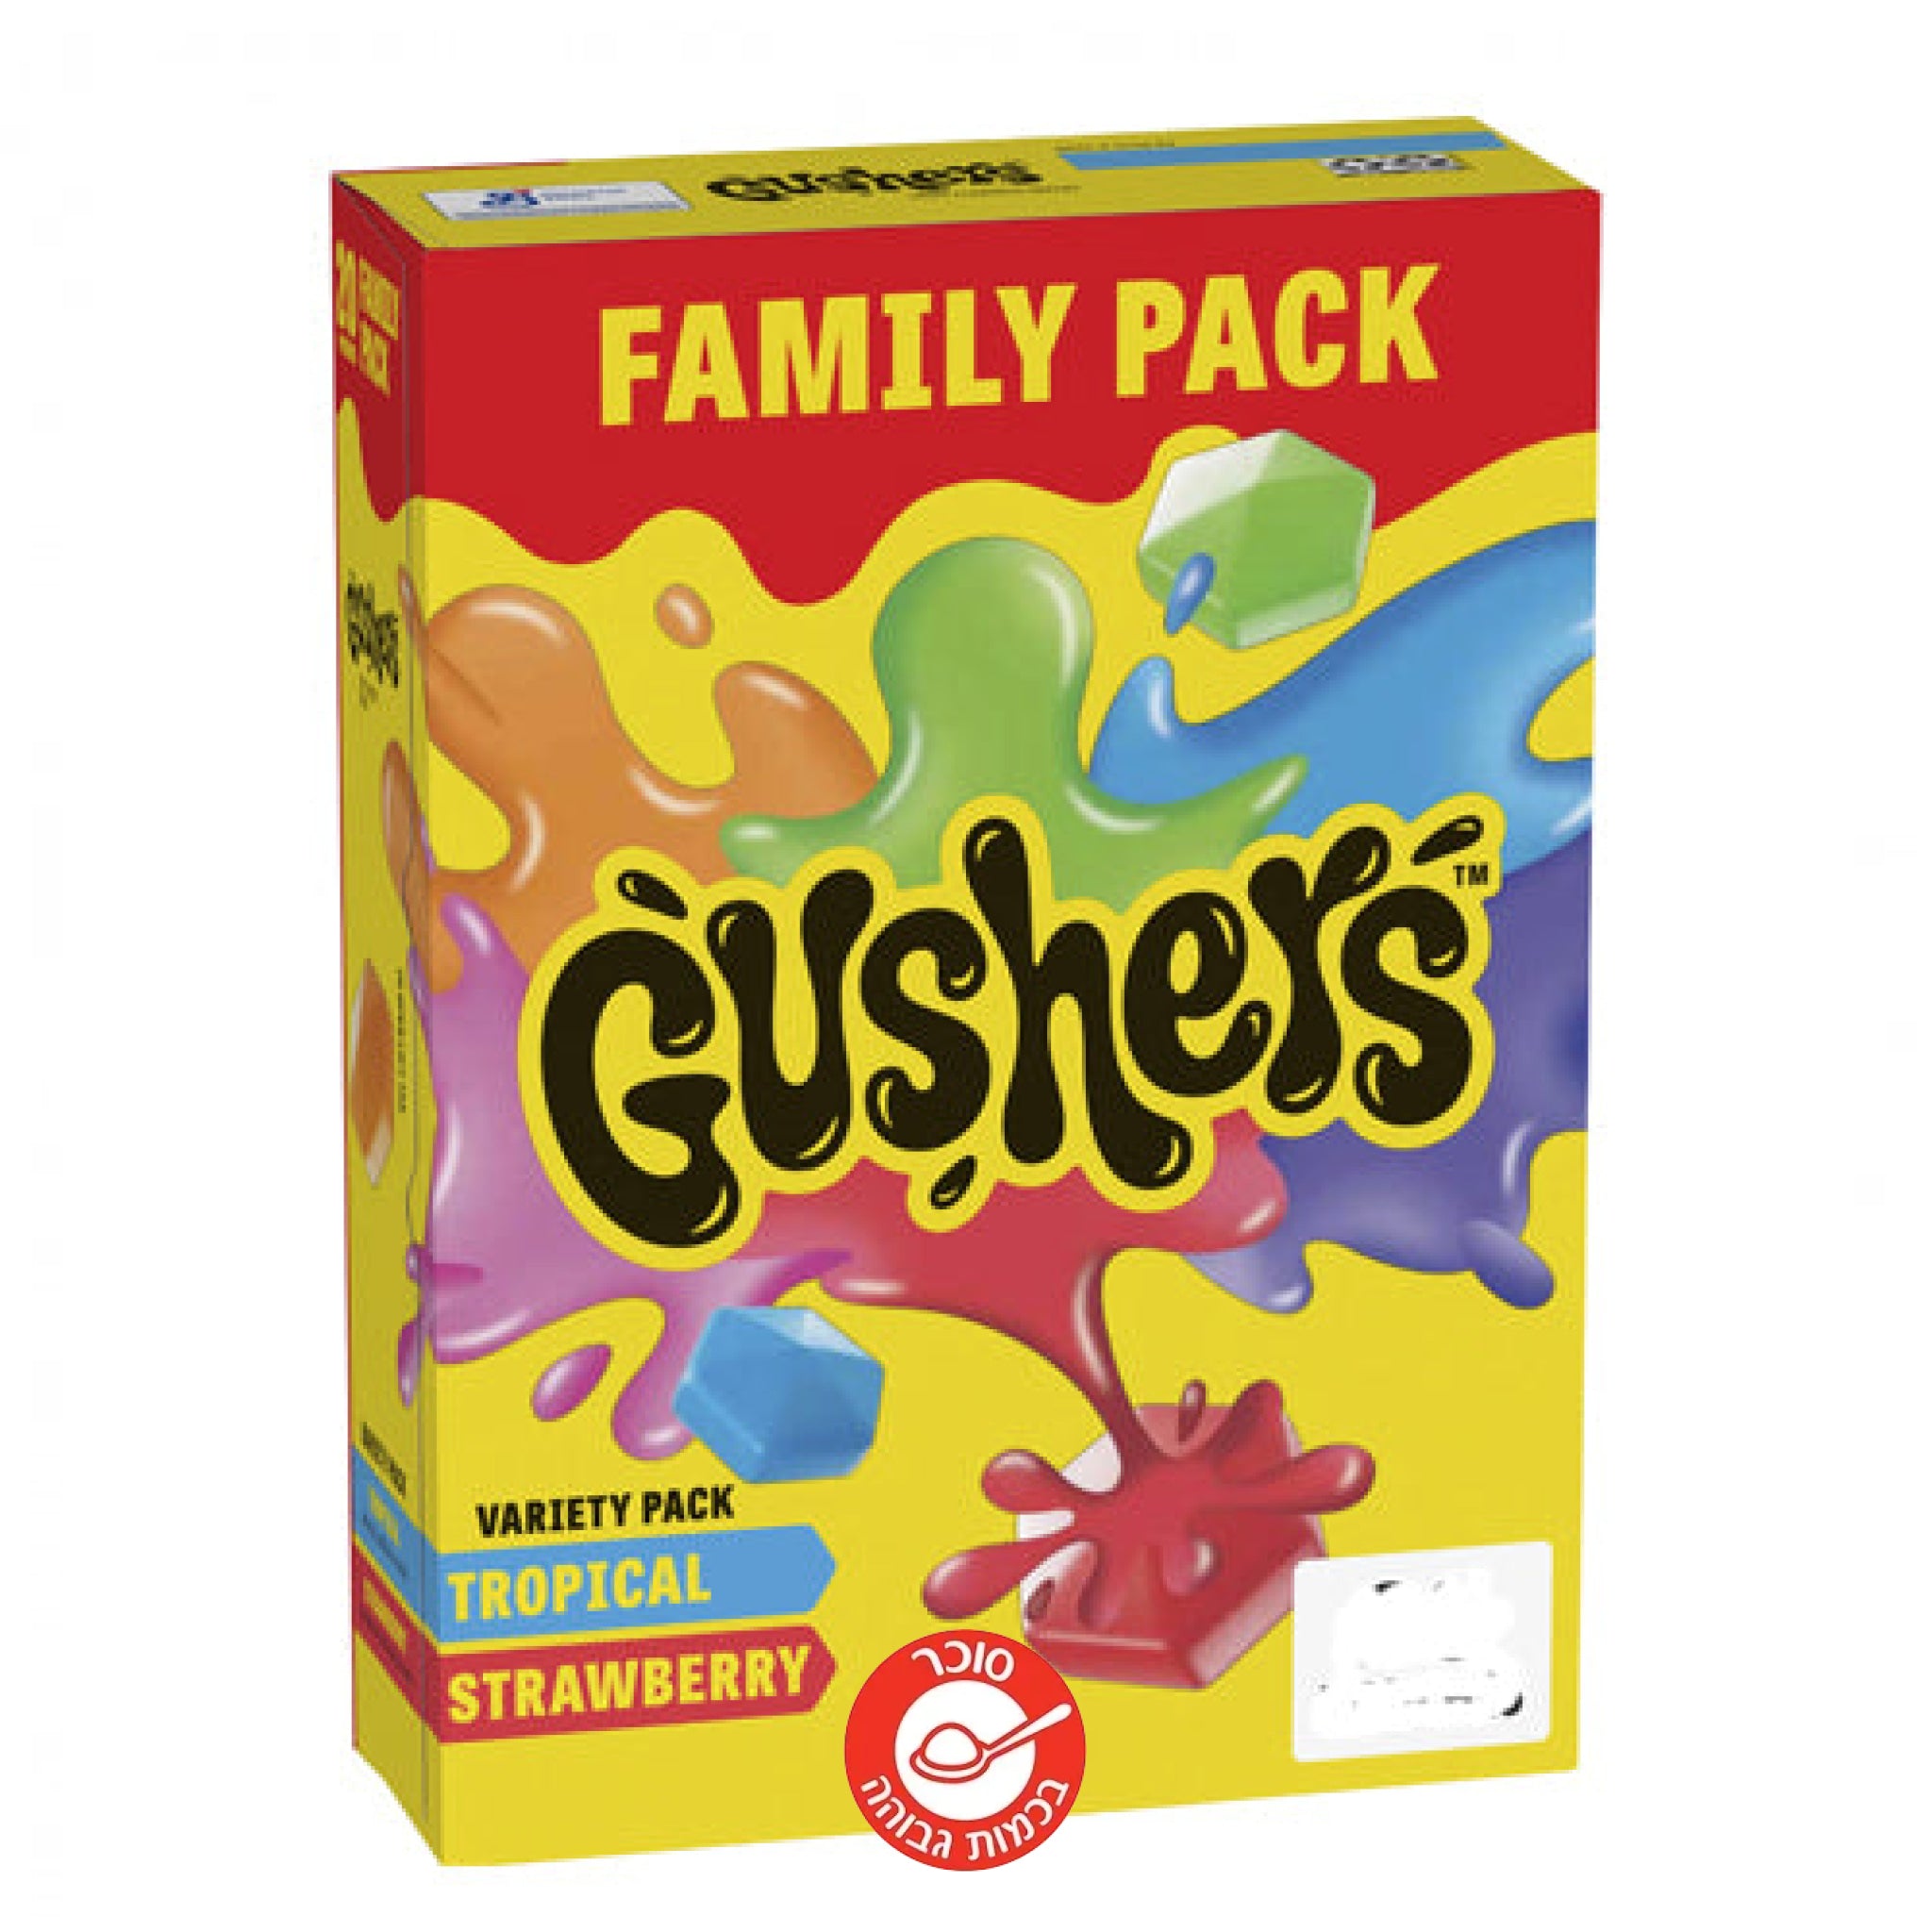 Gushers Tropical and Strawberry גאשרס טרופי ותות שדה